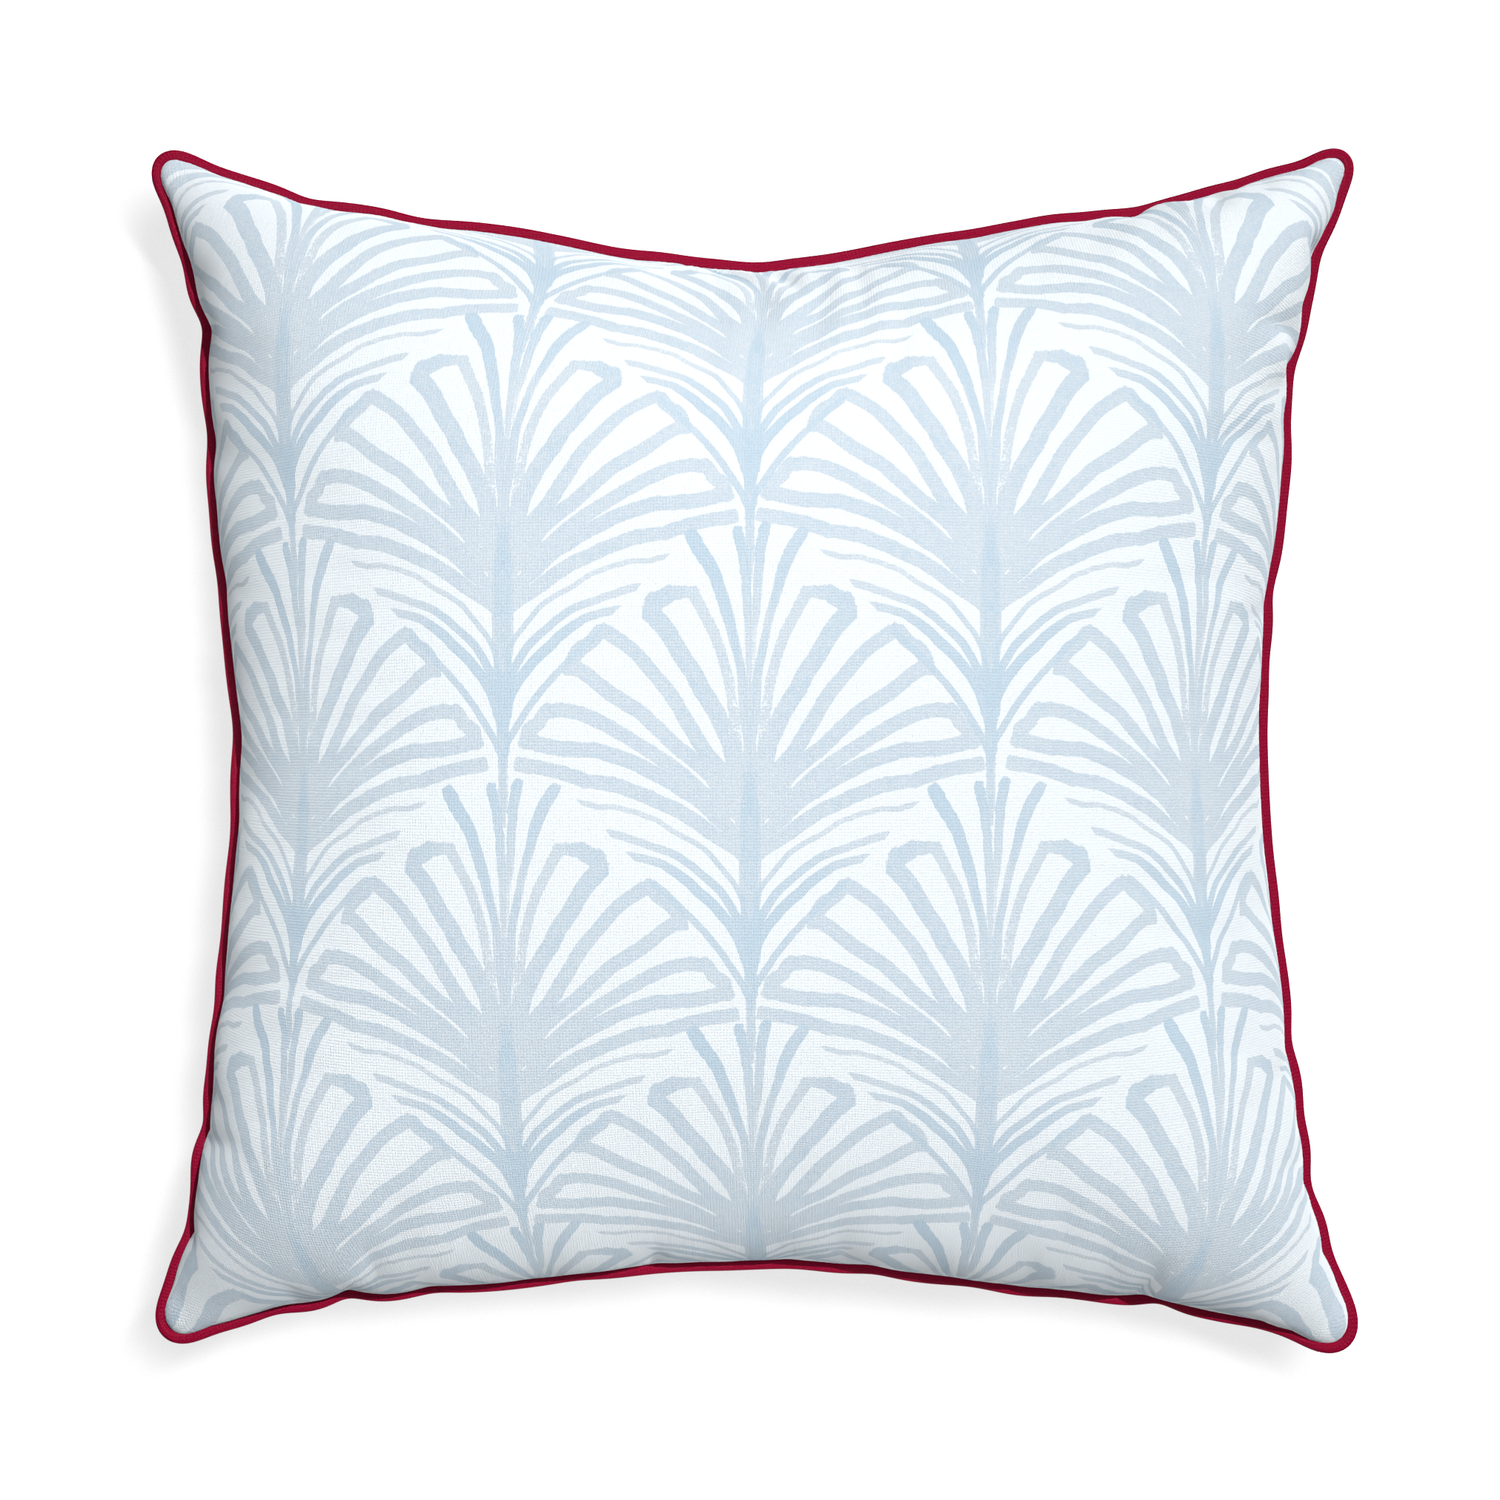 Euro-sham suzy sky custom pillow with raspberry piping on white background